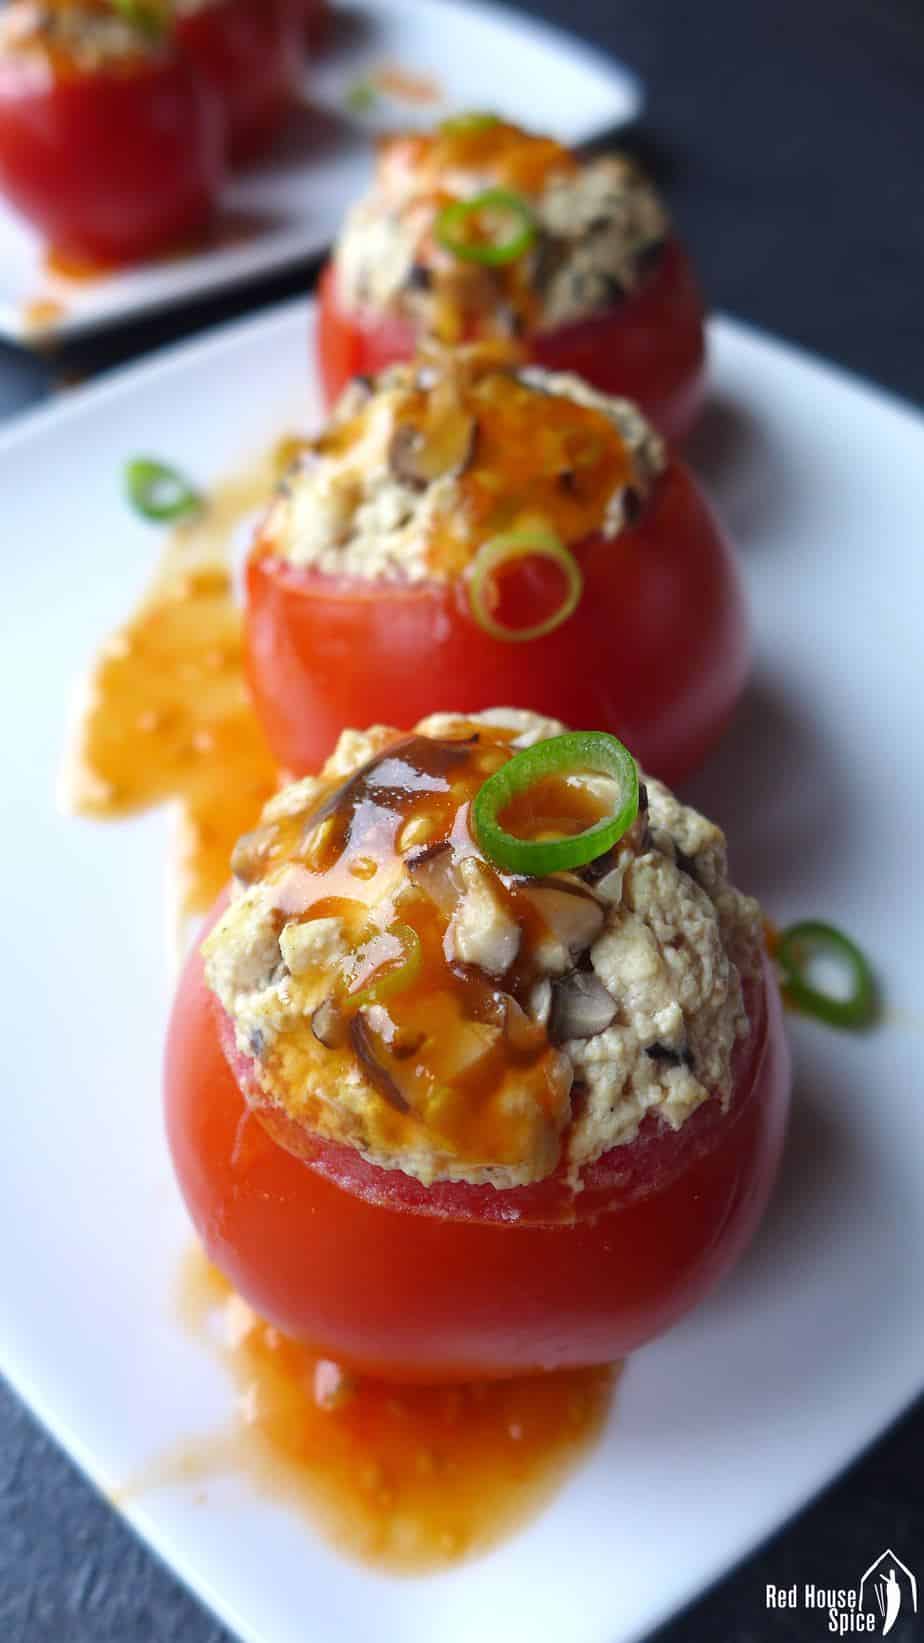 Juicy tomatoes are hollowed and steamed with well seasoned tofu crumbs. These tofu-stuffed tomatoes are then served with a scrumptious sweet and sour sauce.